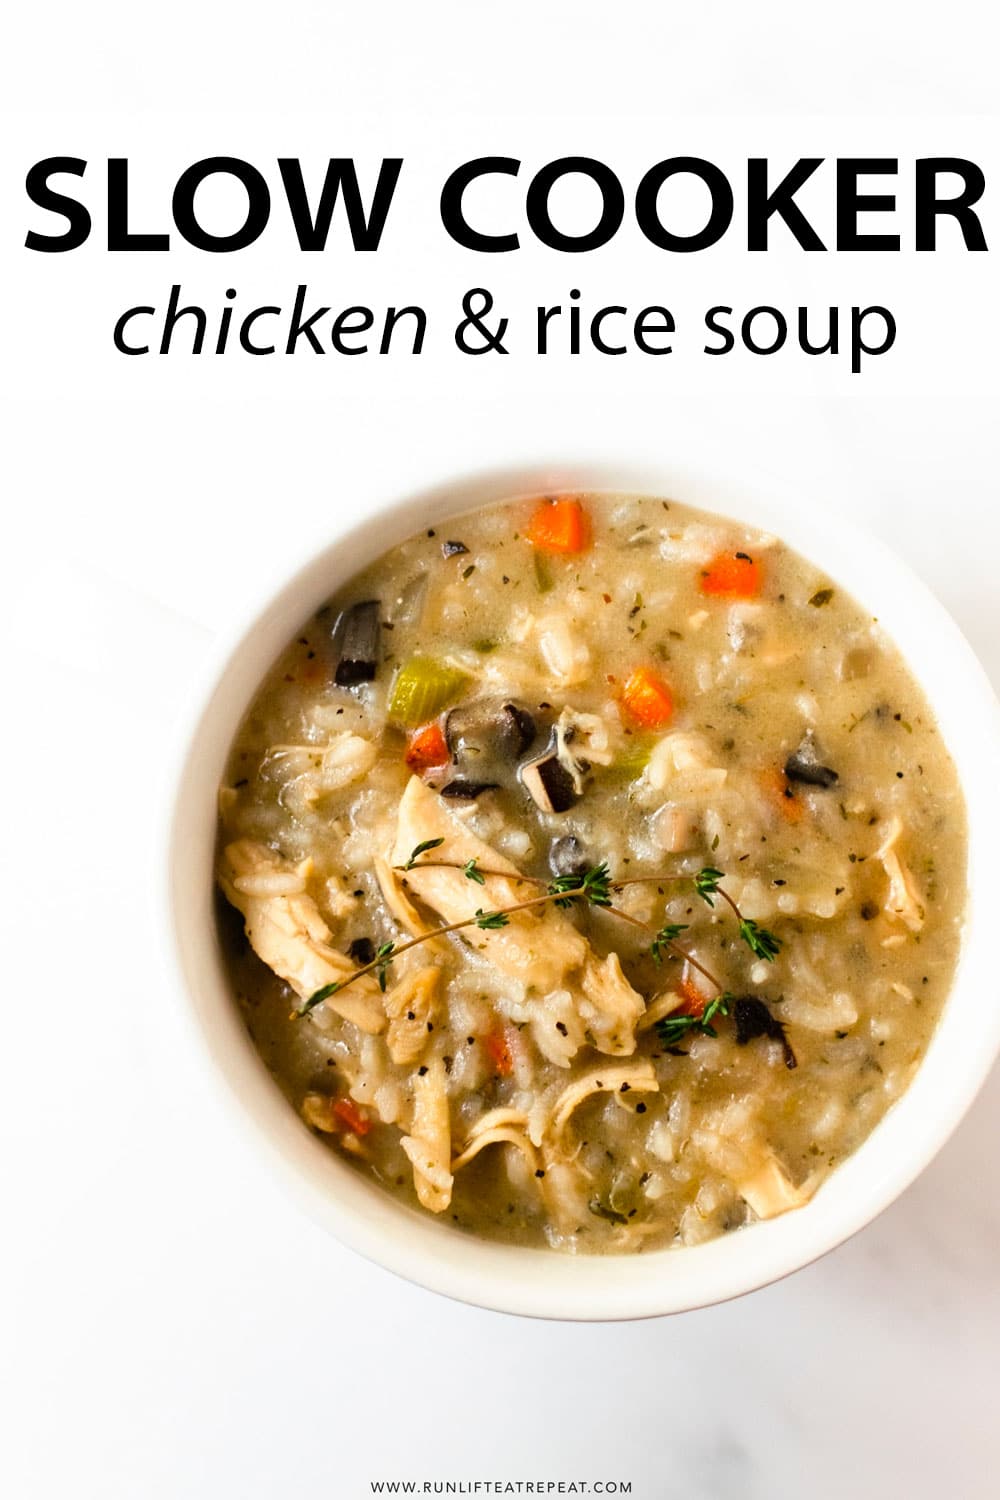 This slow cooker creamy chicken and rice soup is incredibly simple to make. Made with carrots, celery, onions, mushrooms, chicken, rice, variety of spices, and finished off with cream. Pair this with grilled cheese or crusty bread for dinner on a cold evening!